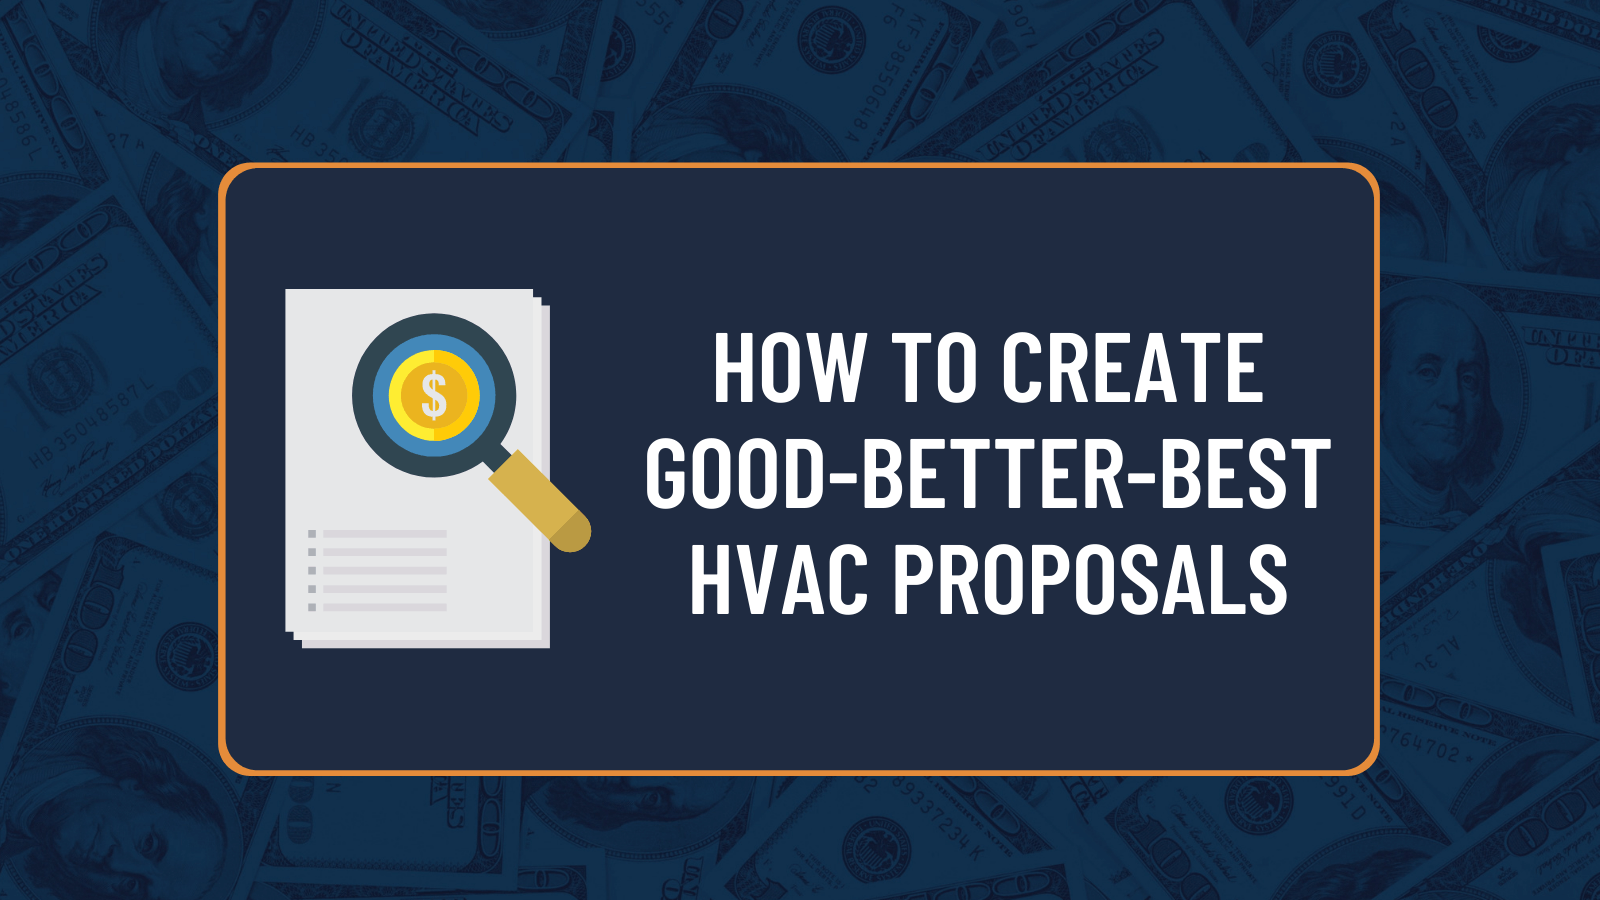 What to know about marketing of HVAC business